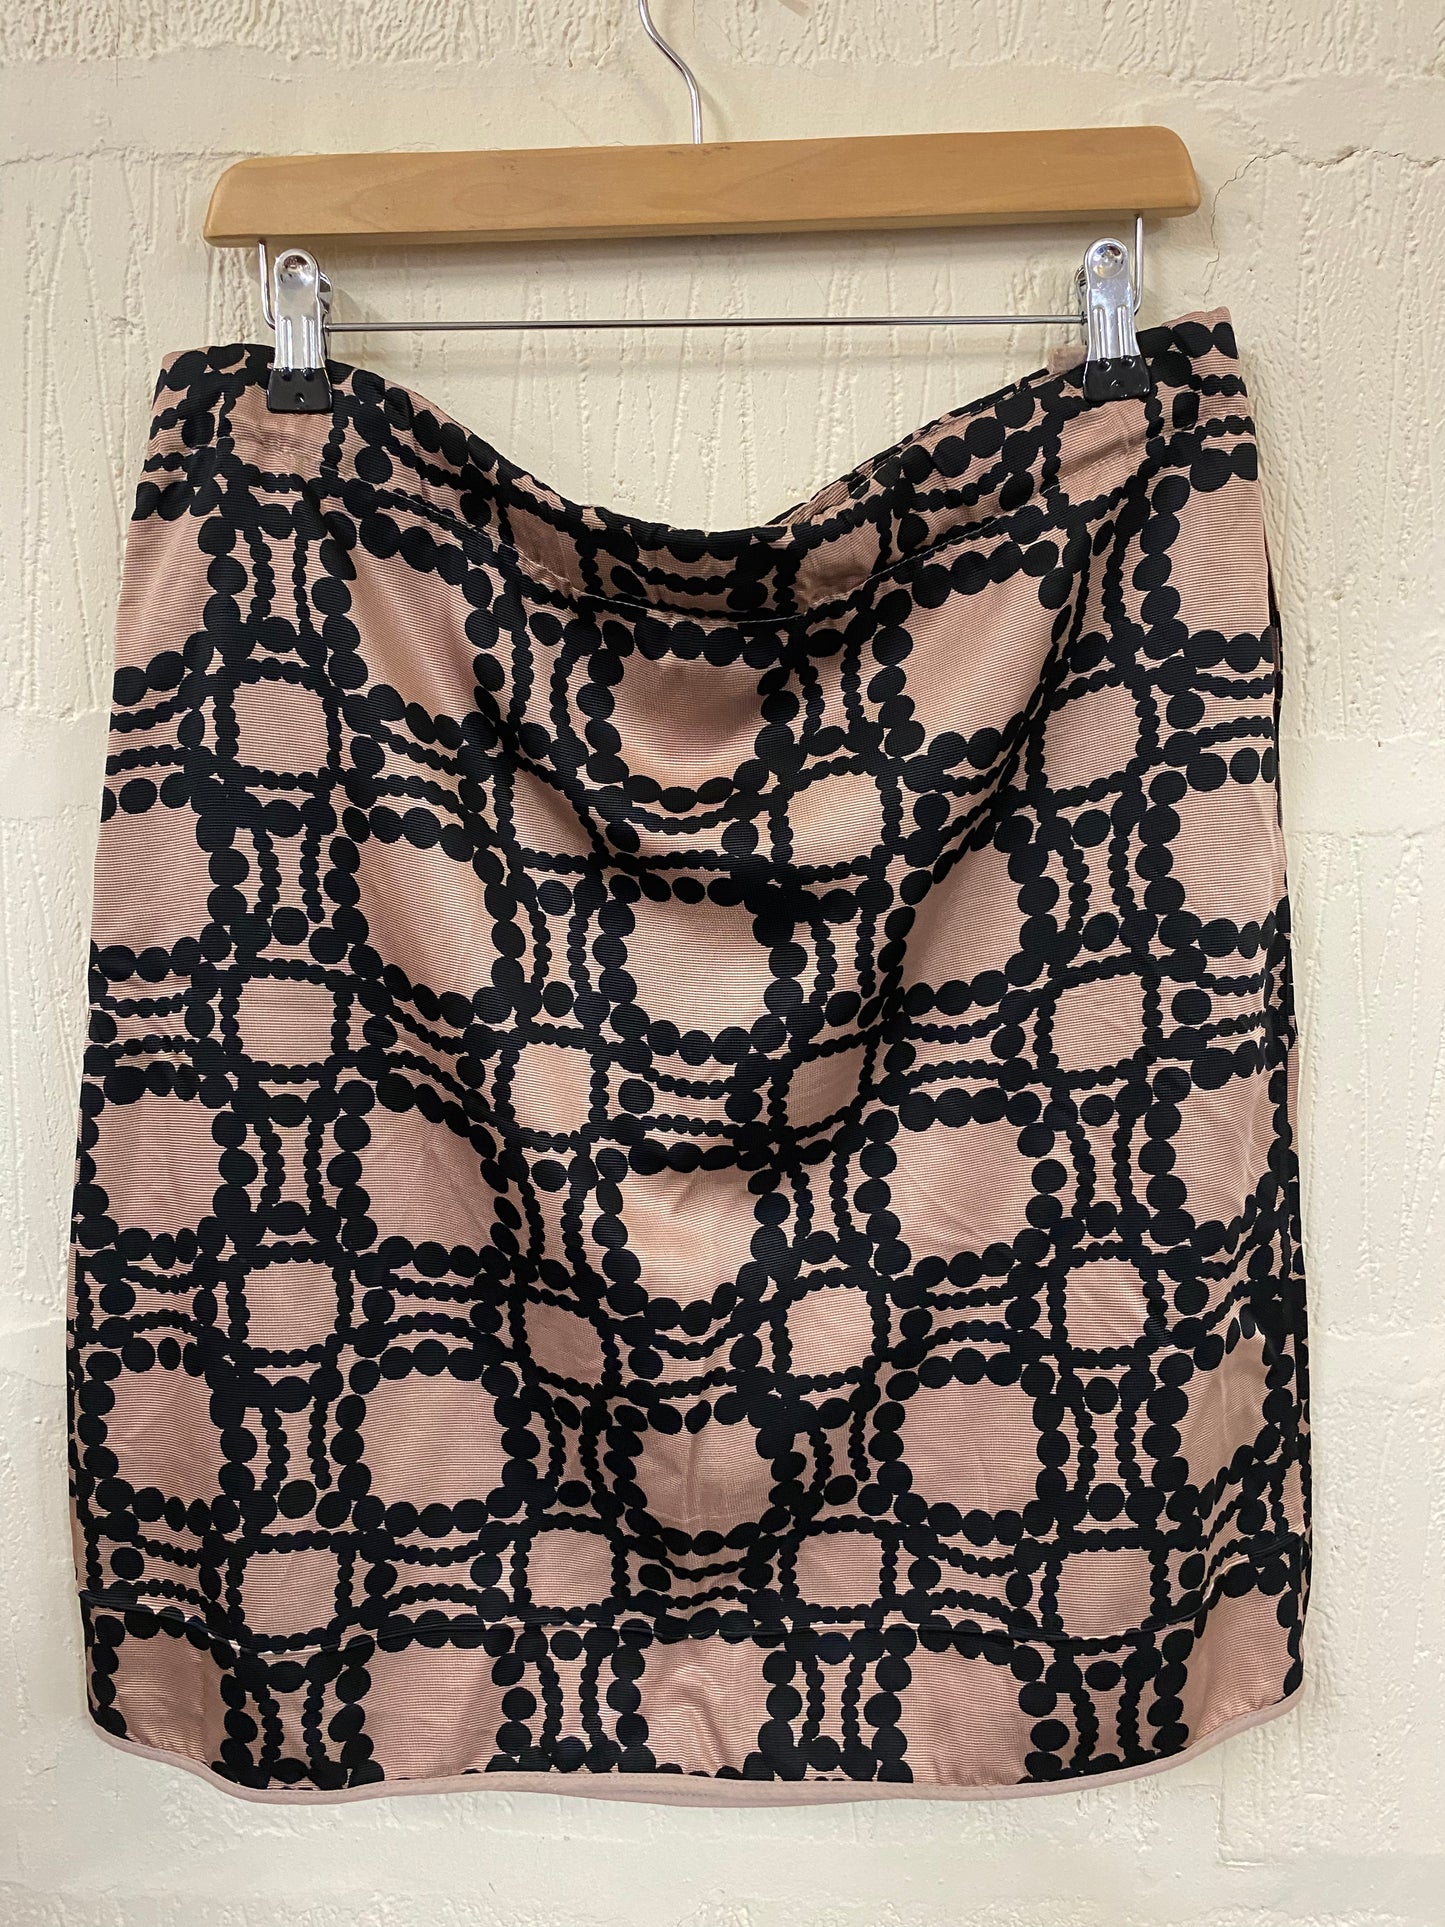 Marni Bronze and Black Patterned Knee Length Skirt Size 102